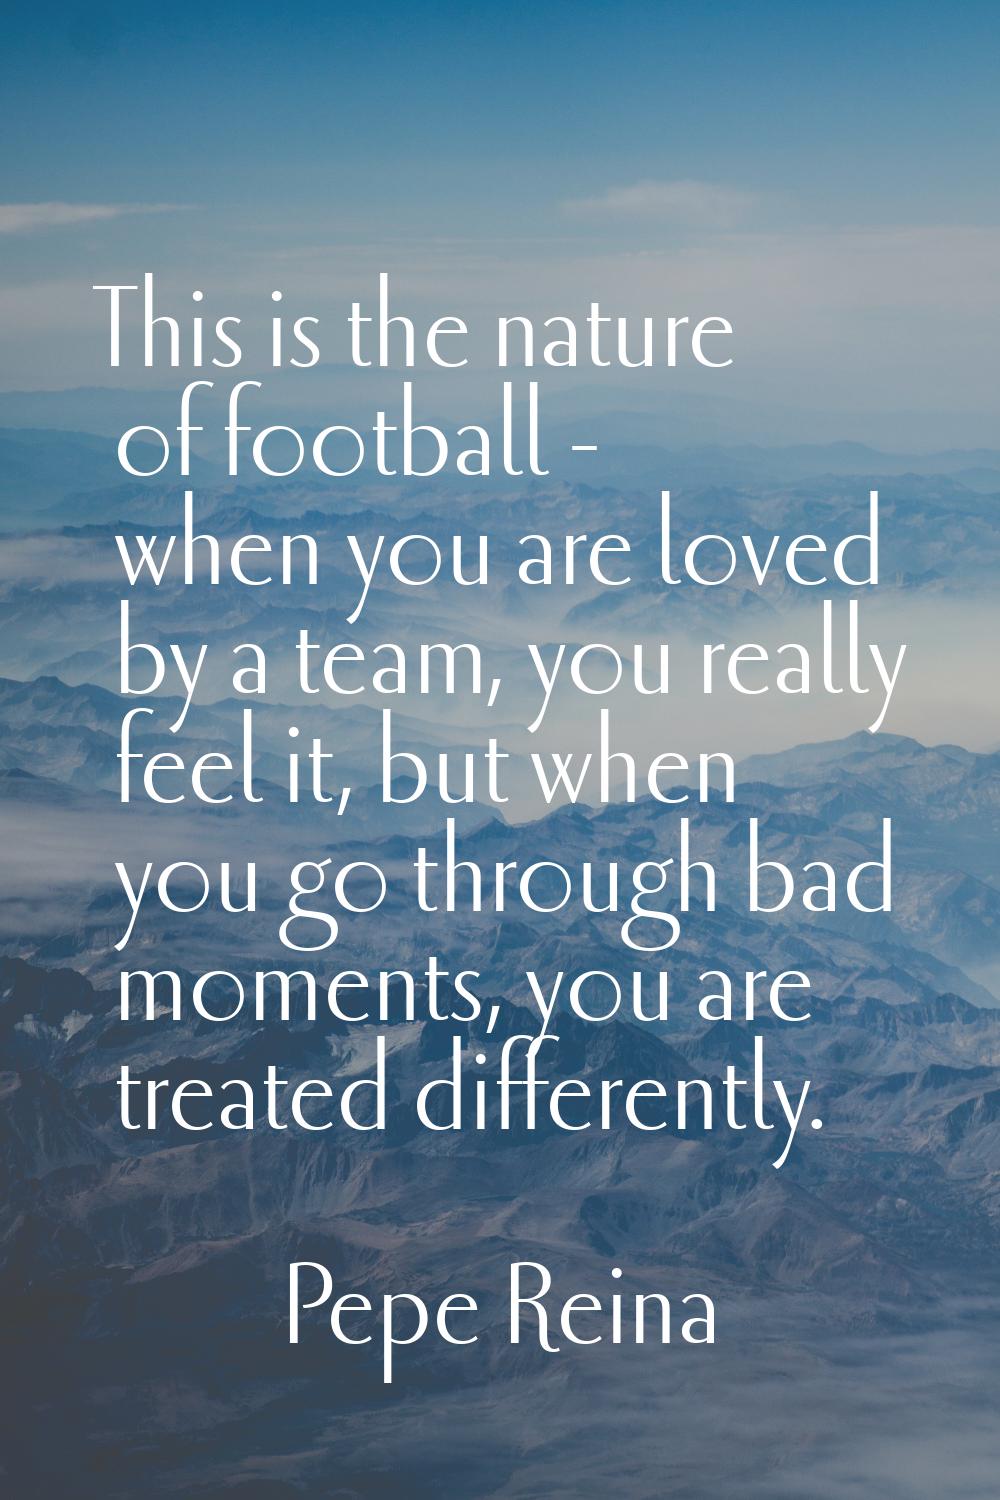 This is the nature of football - when you are loved by a team, you really feel it, but when you go 